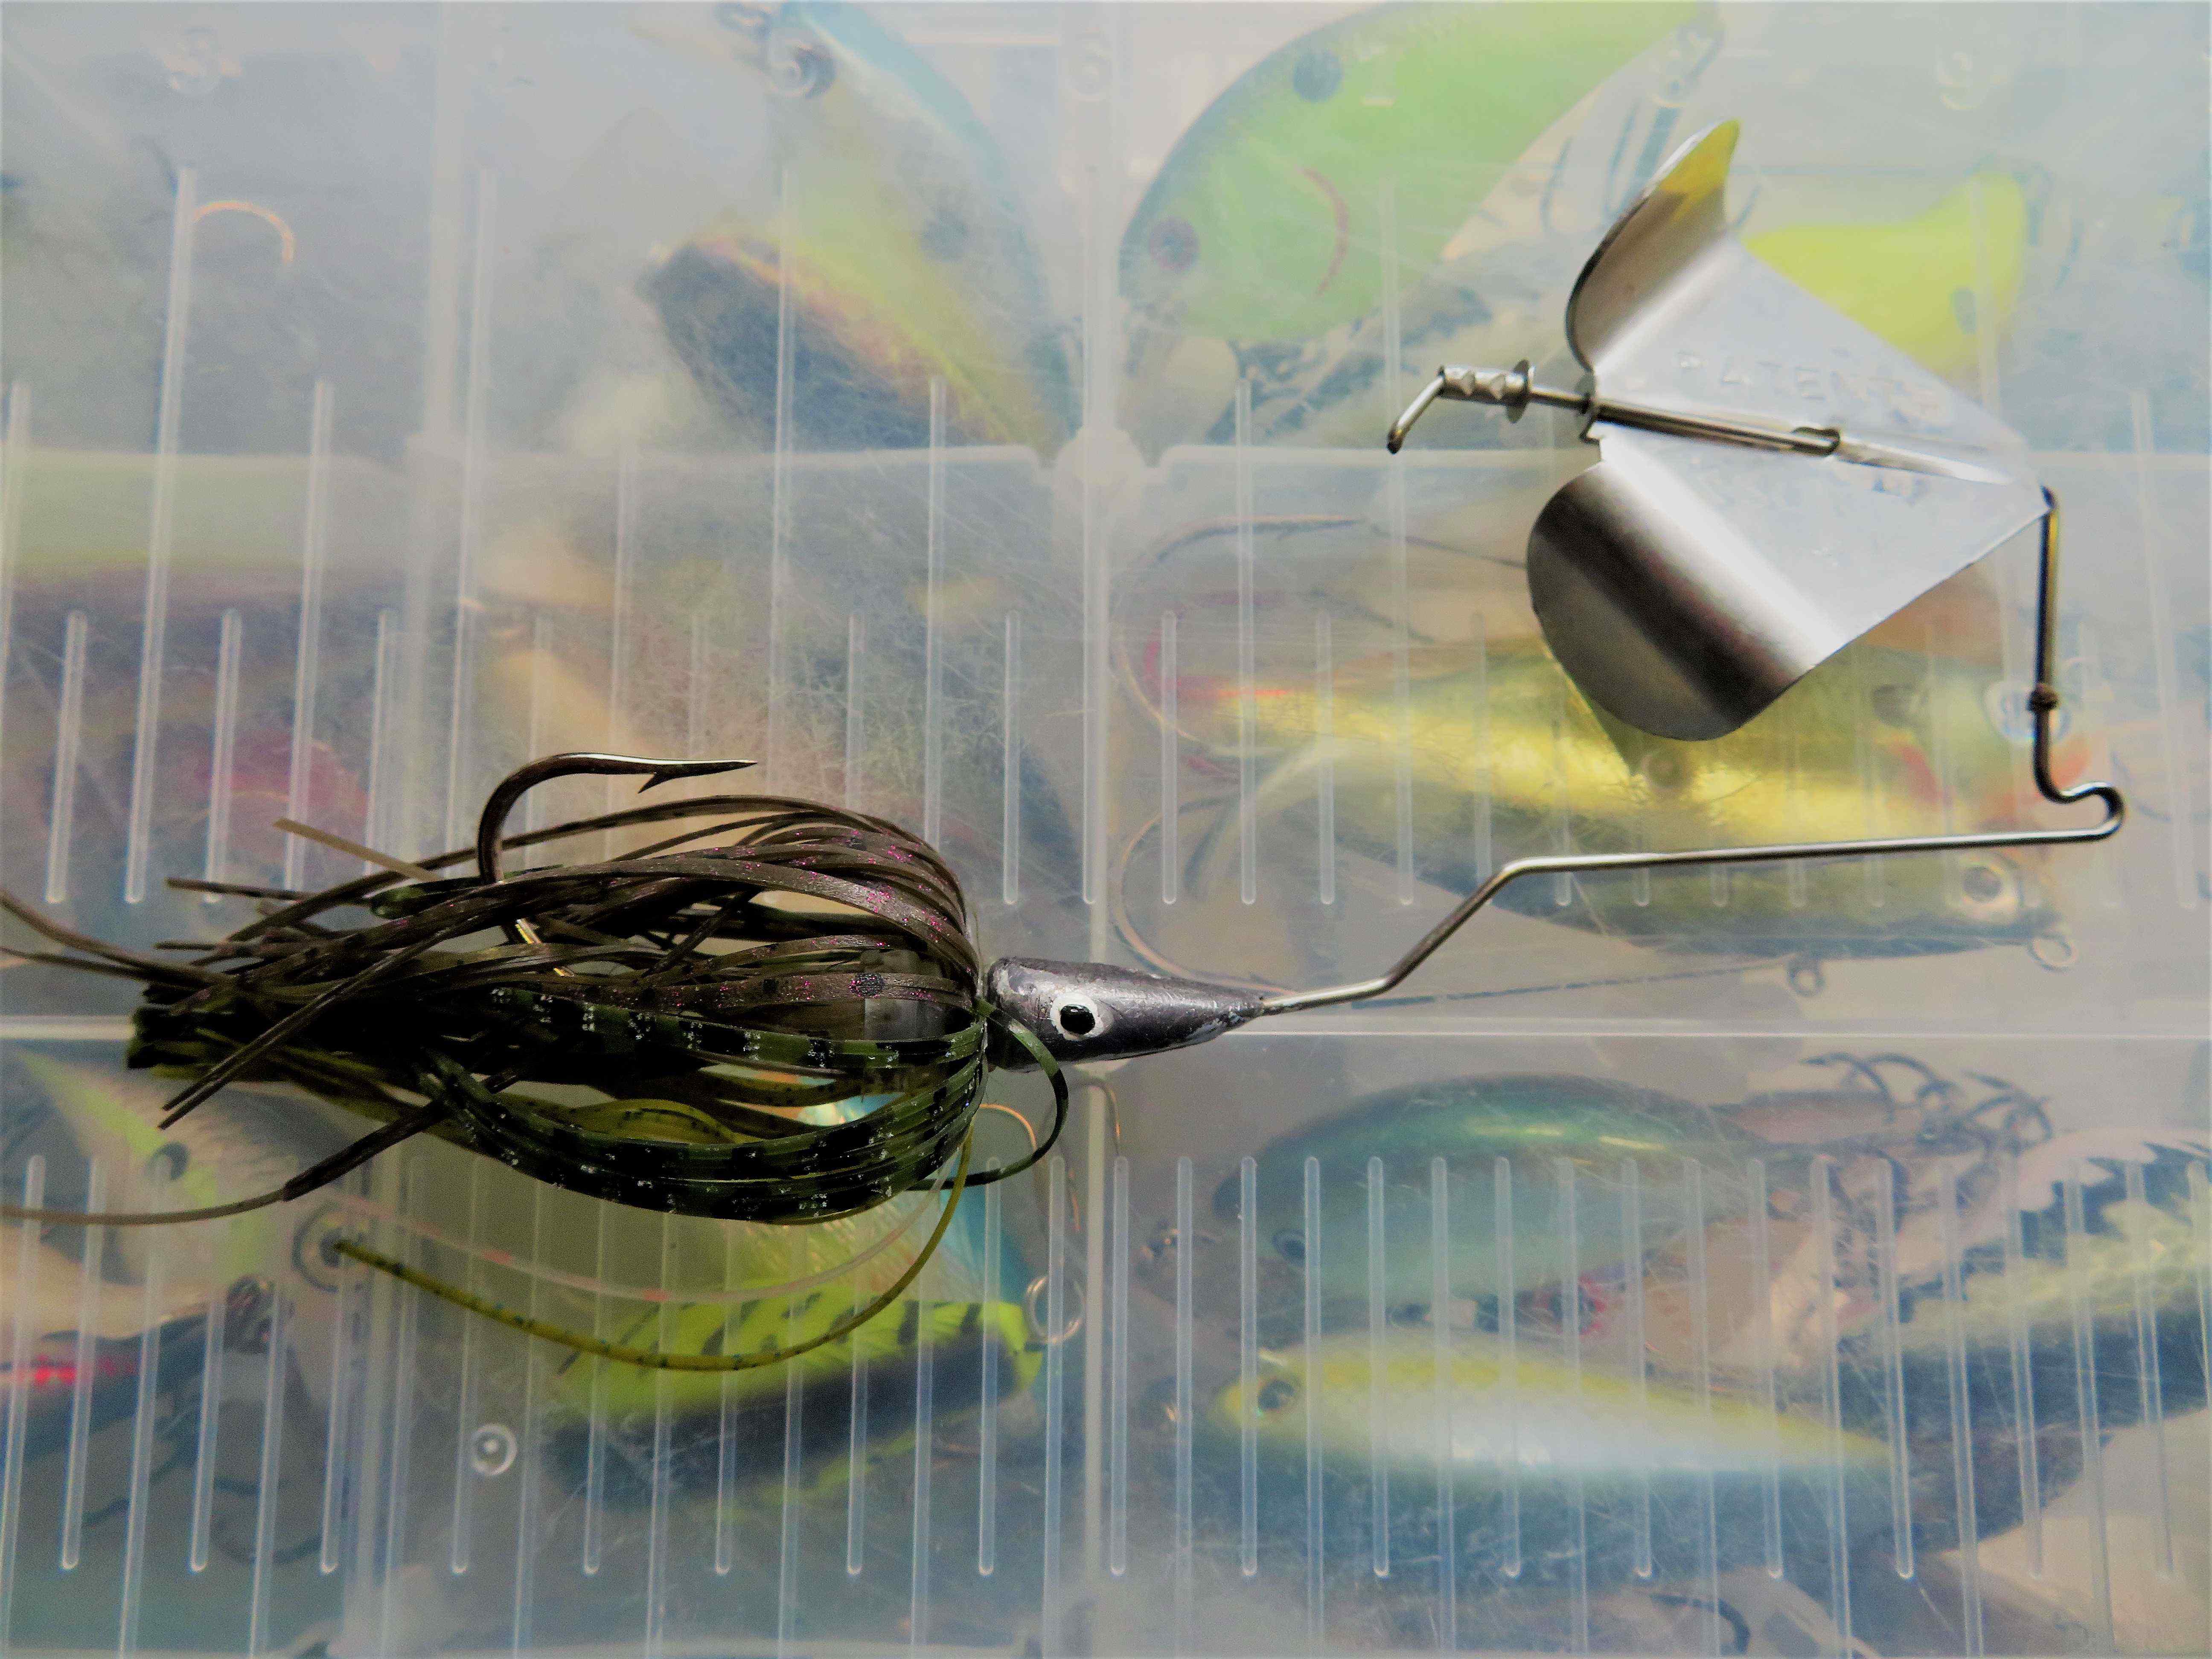 2nd best buzzbait - Fishing Tackle - Bass Fishing Forums